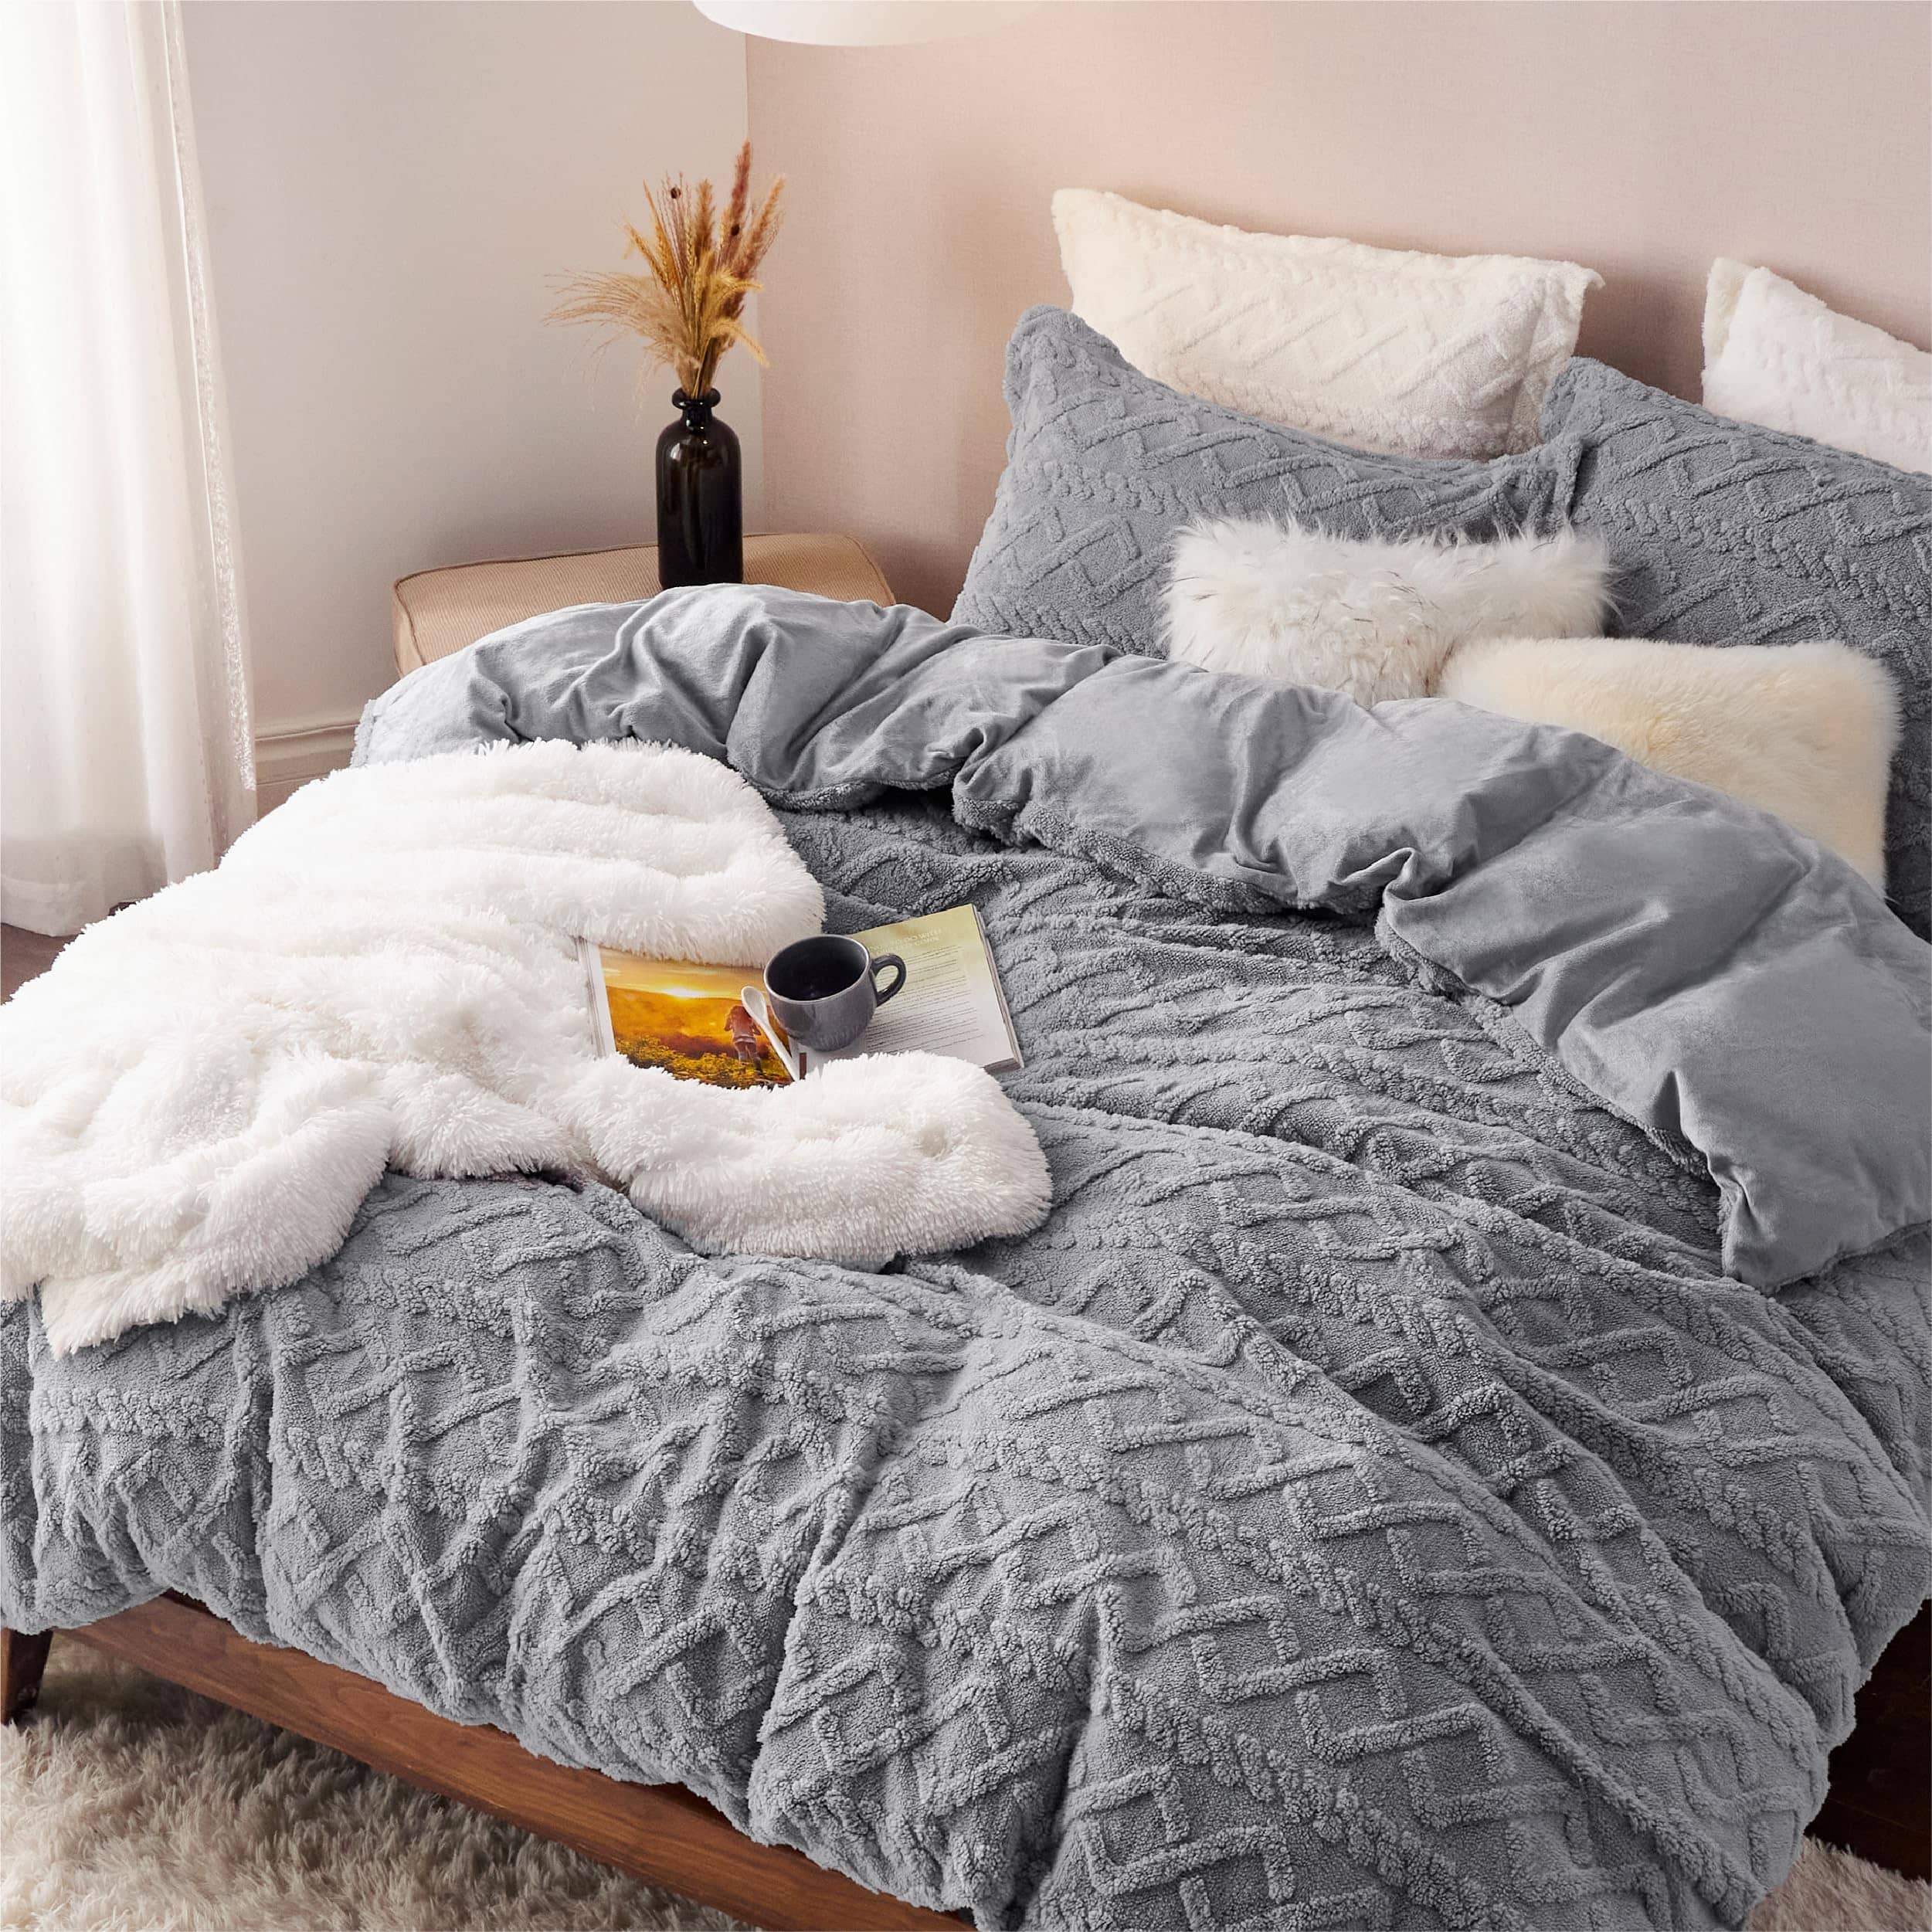 CozyLux Queen Size Comforter Set - 3 Pieces Grey Soft Luxury Cationic  Dyeing Bedding Comforter for All Season, Gray Breathable Lightweight Fluffy  Bed